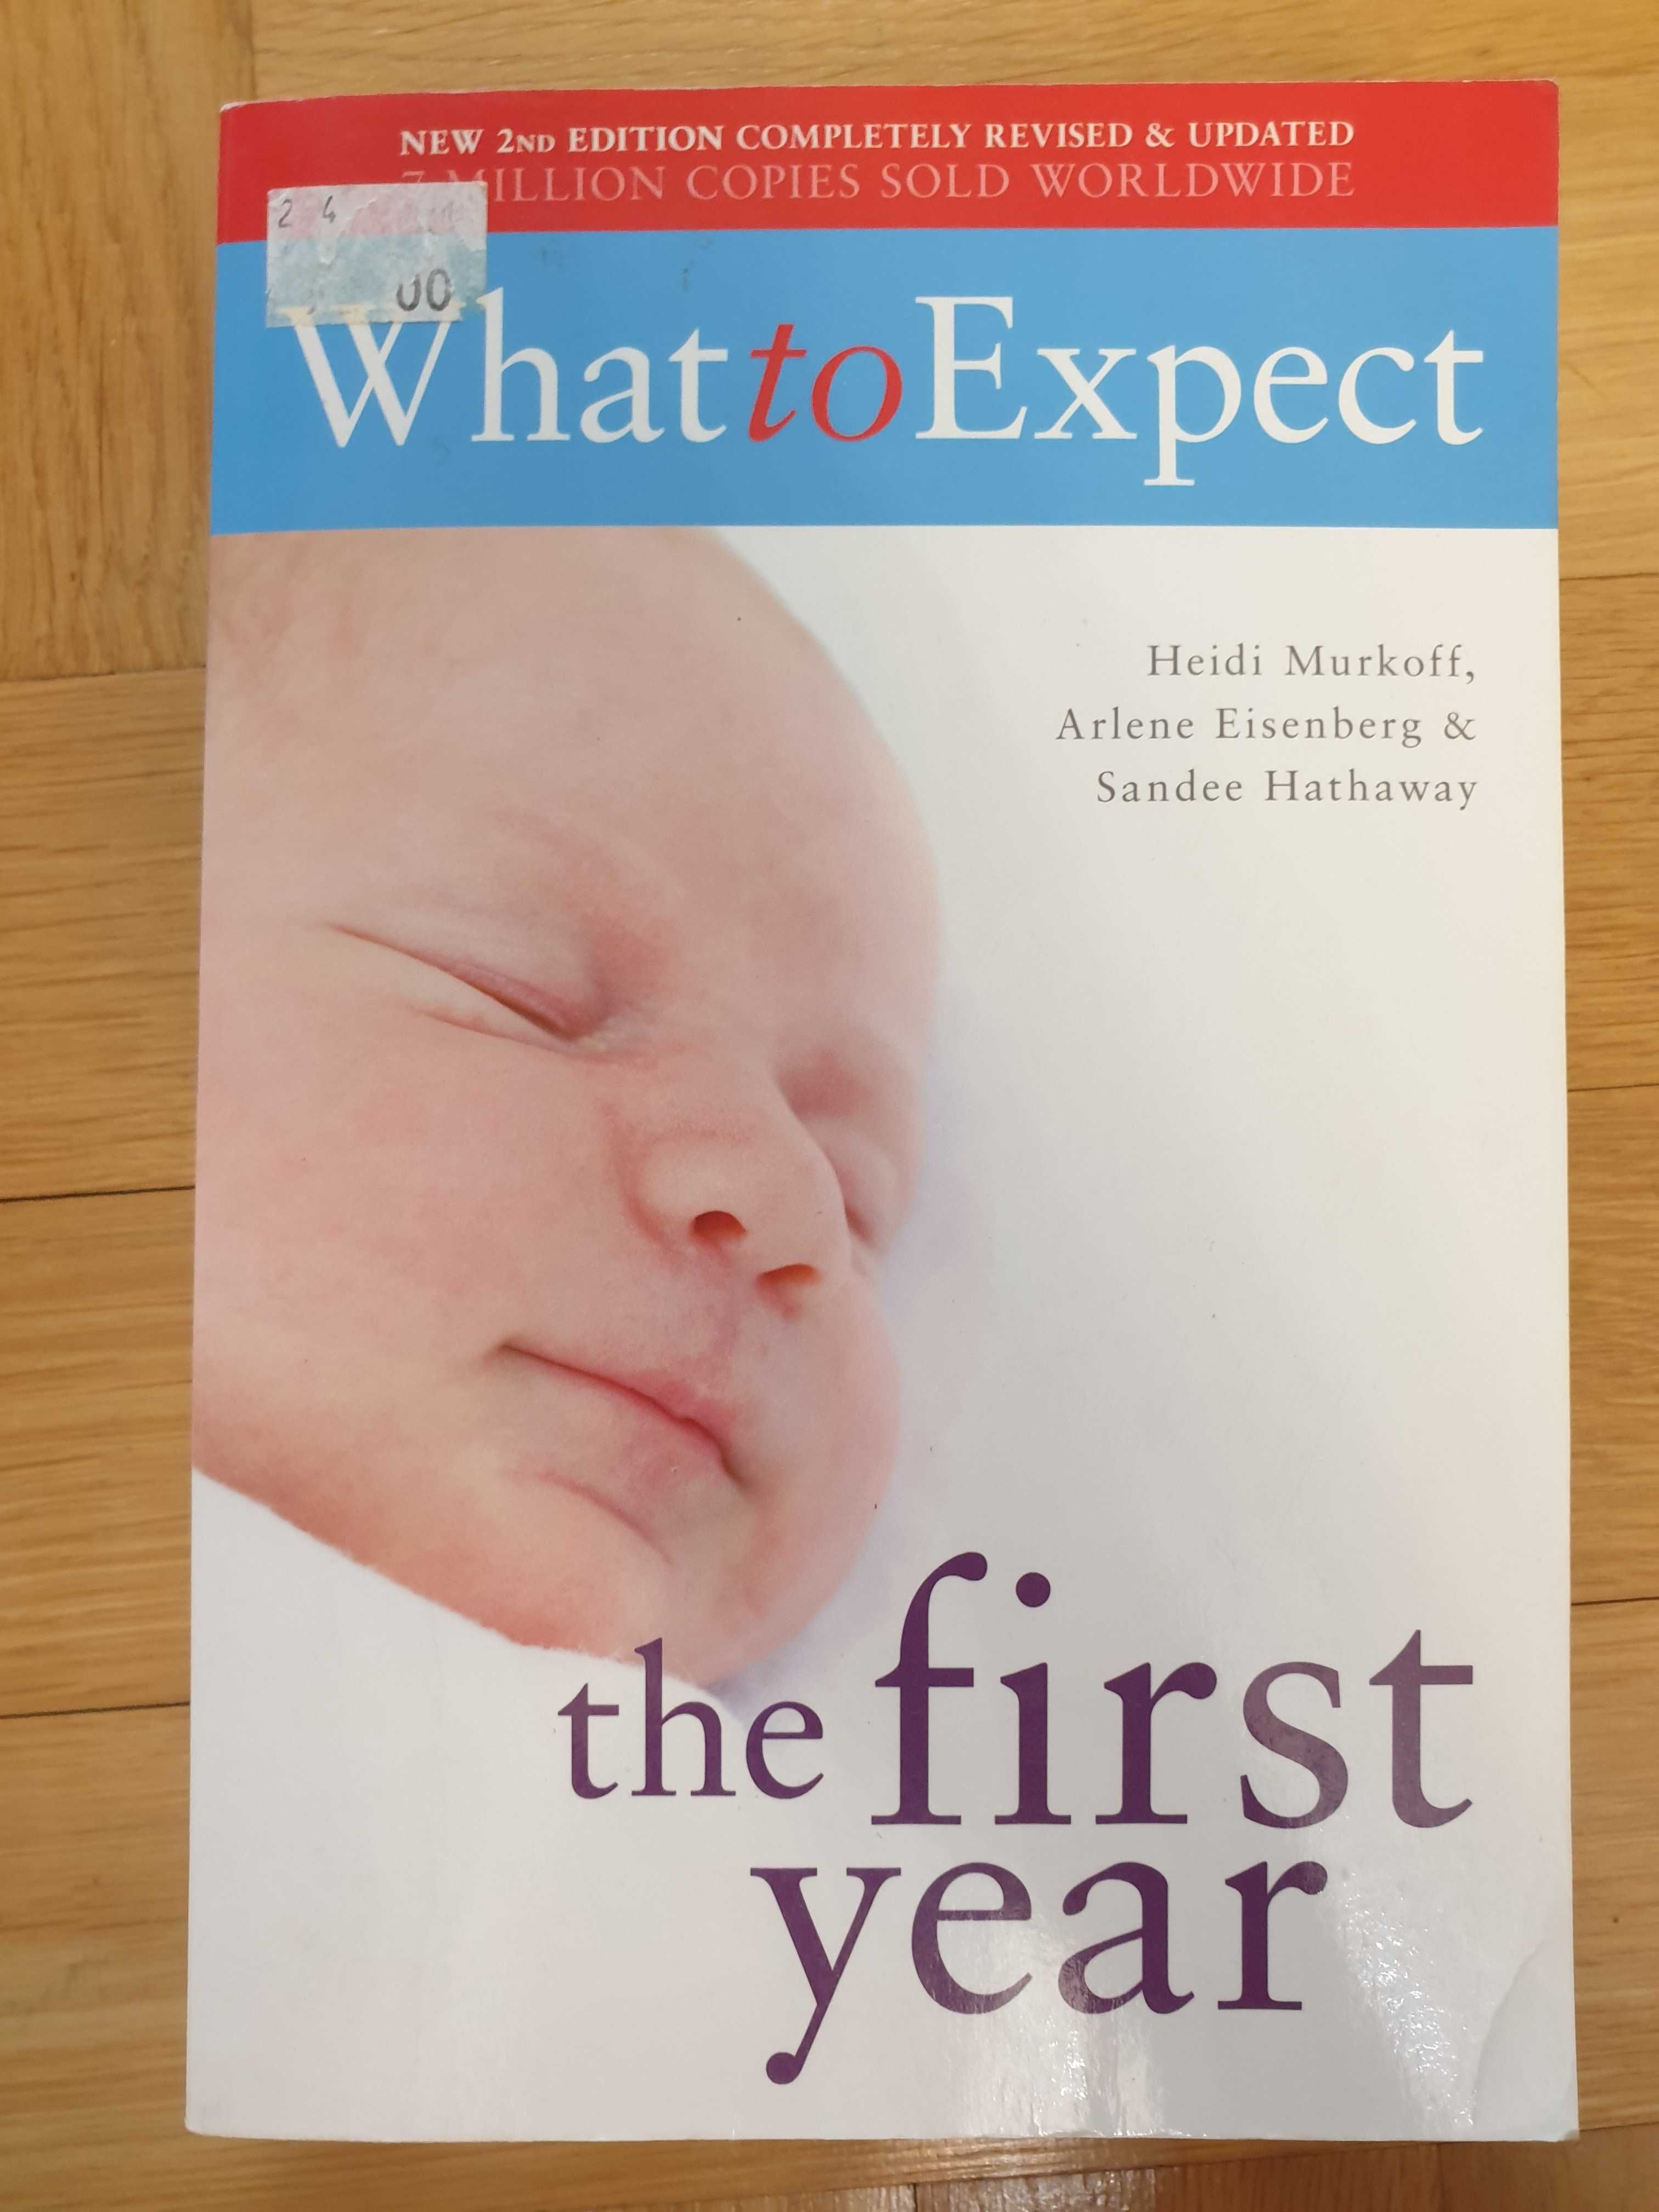 What to Expect: the first year (Heidi Murkoff)